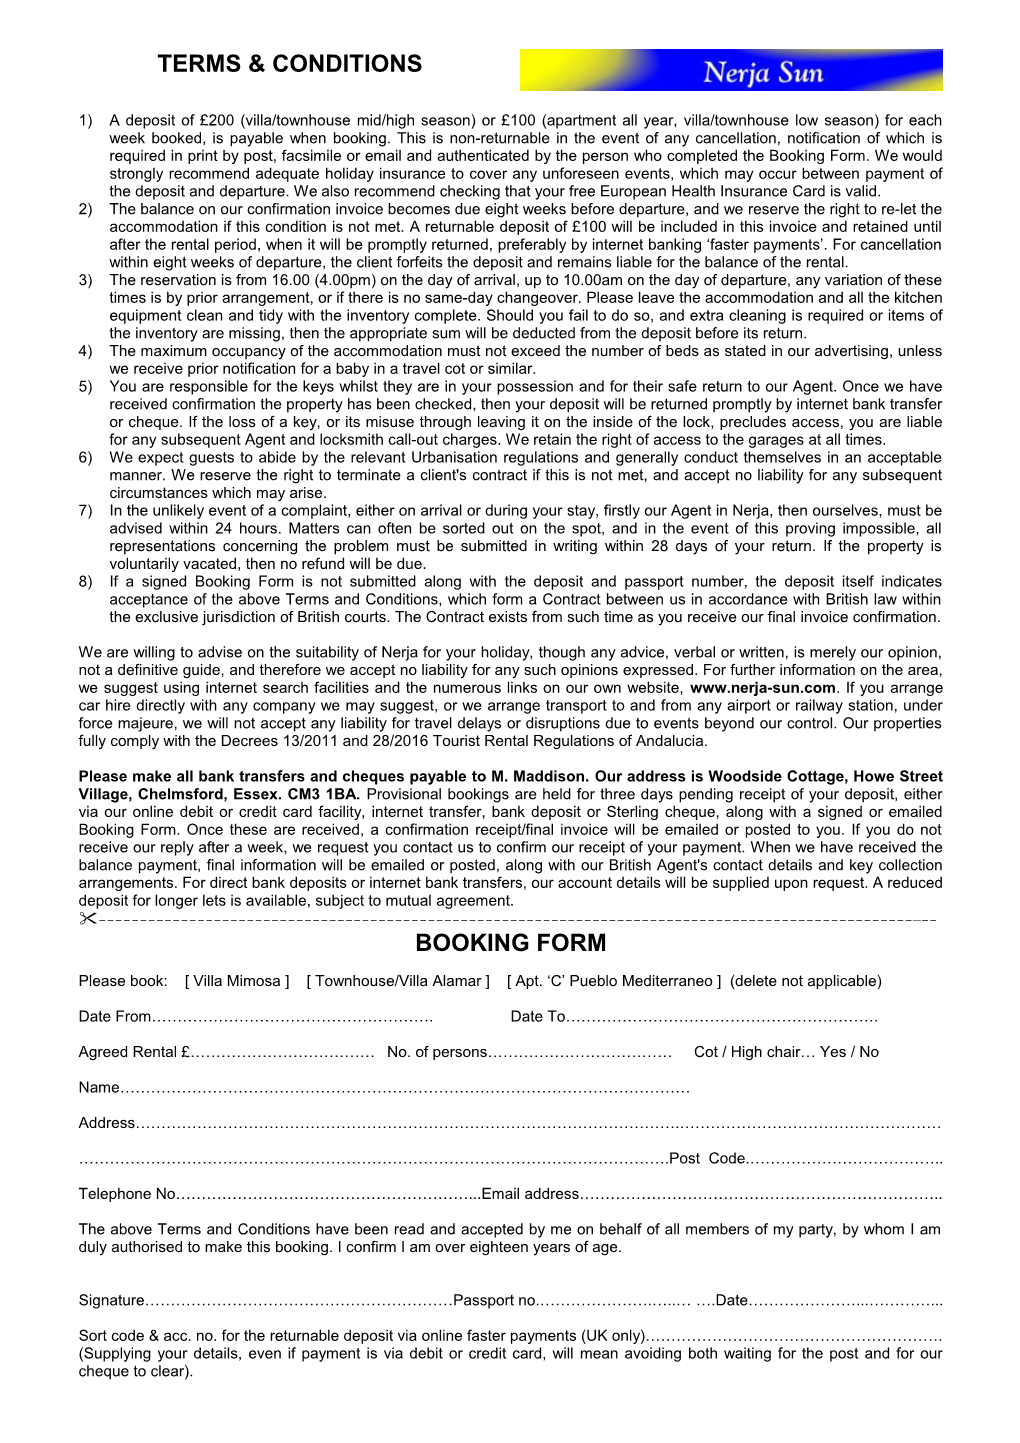 Property Booking Form